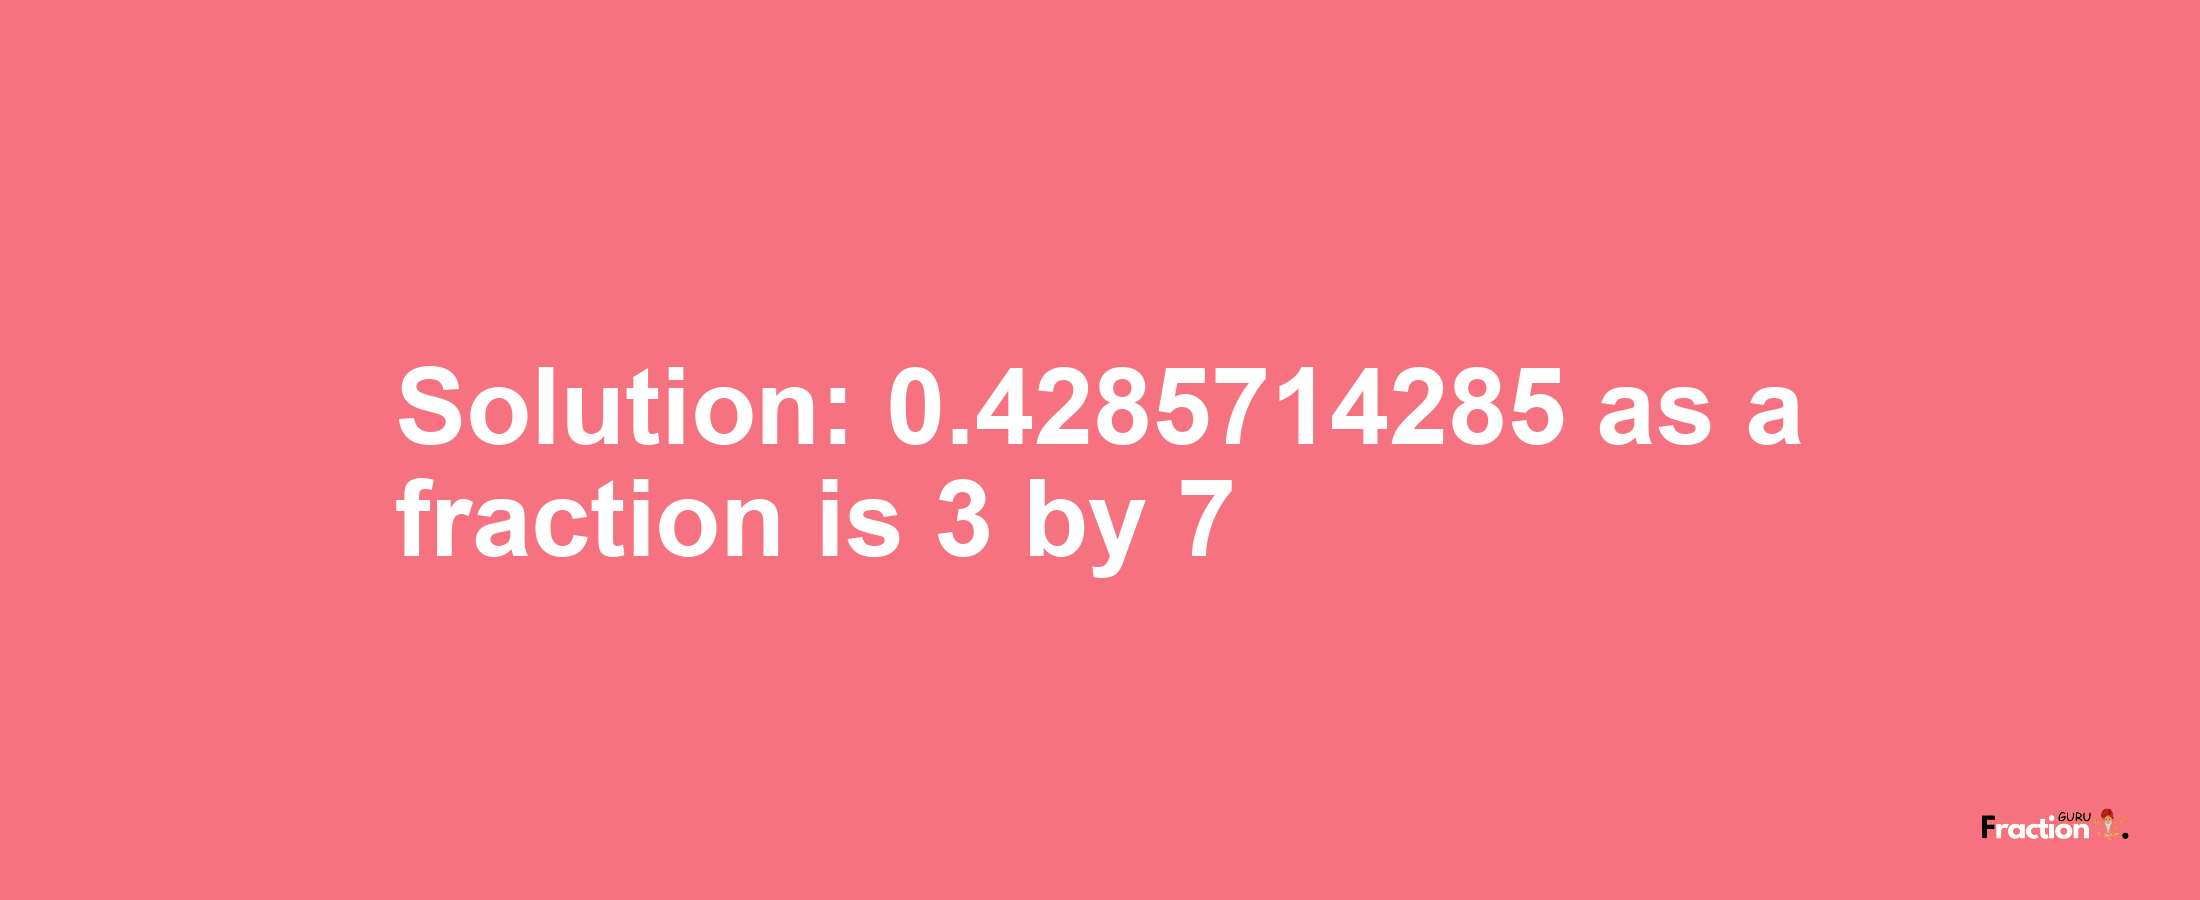 Solution:0.4285714285 as a fraction is 3/7